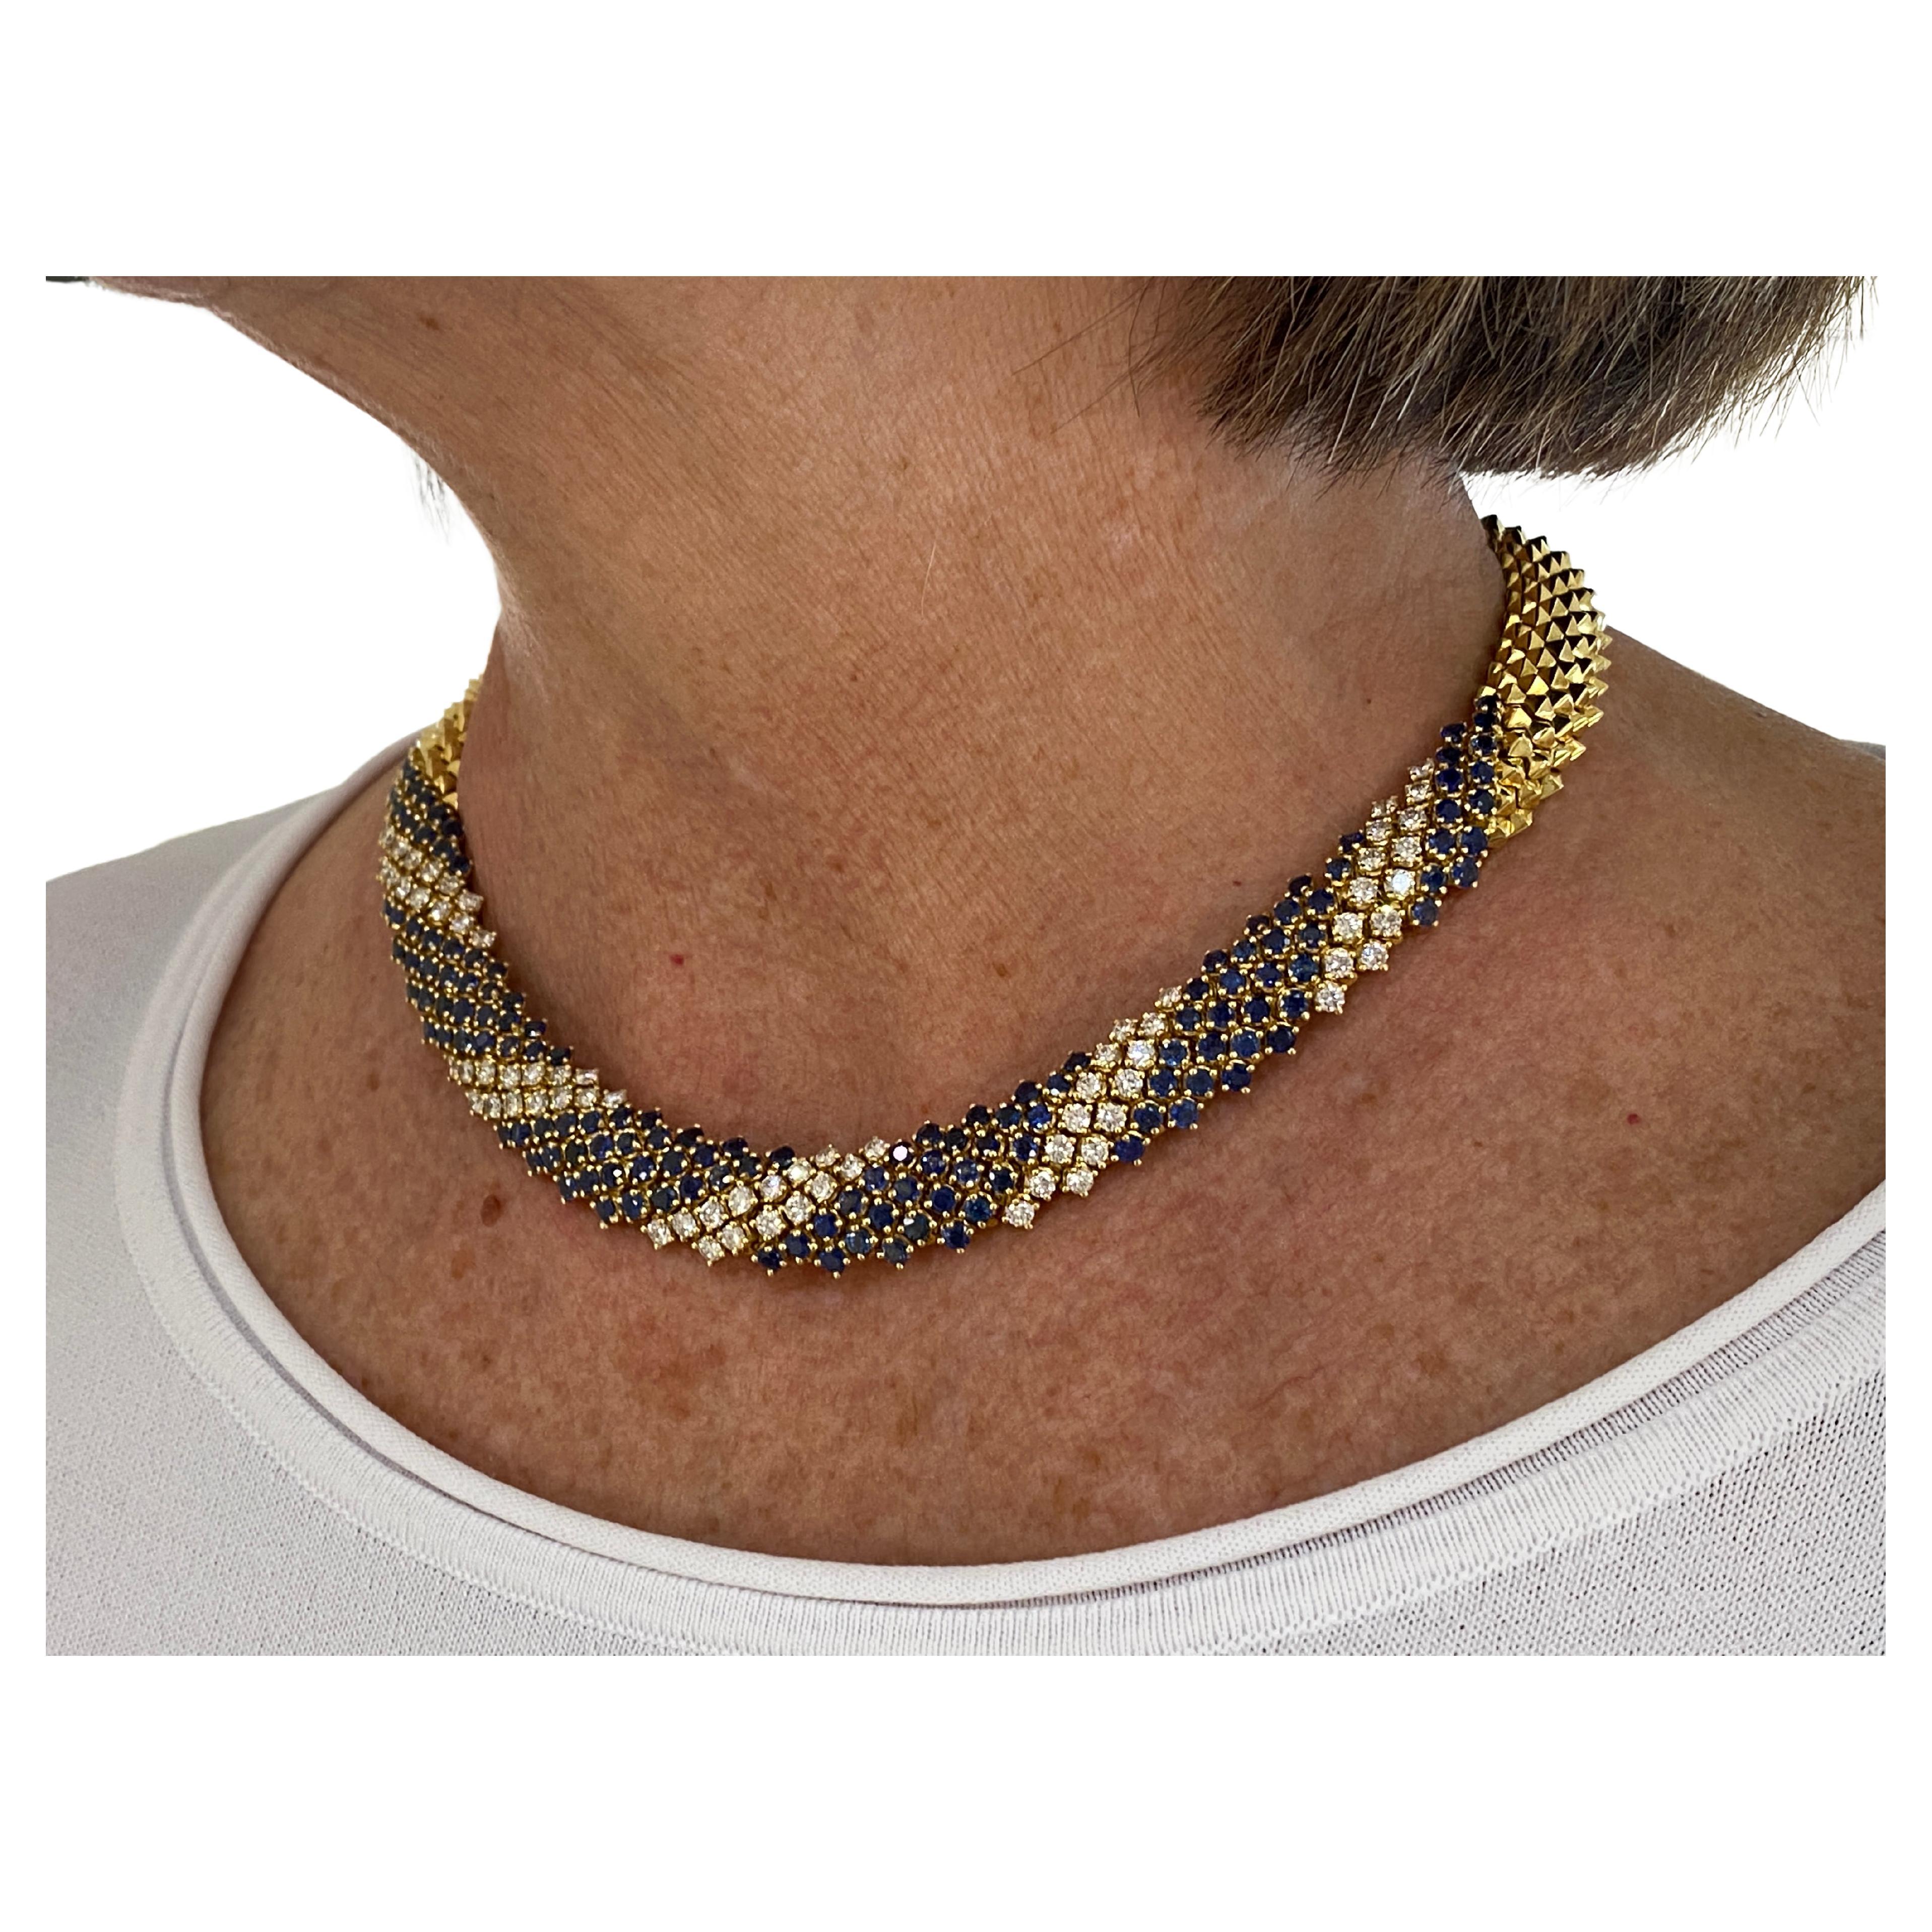 Unique Snake 18kt Yellow Gold Necklace 23 Ct Blue Sapphires 7.42 White Diamonds For Sale